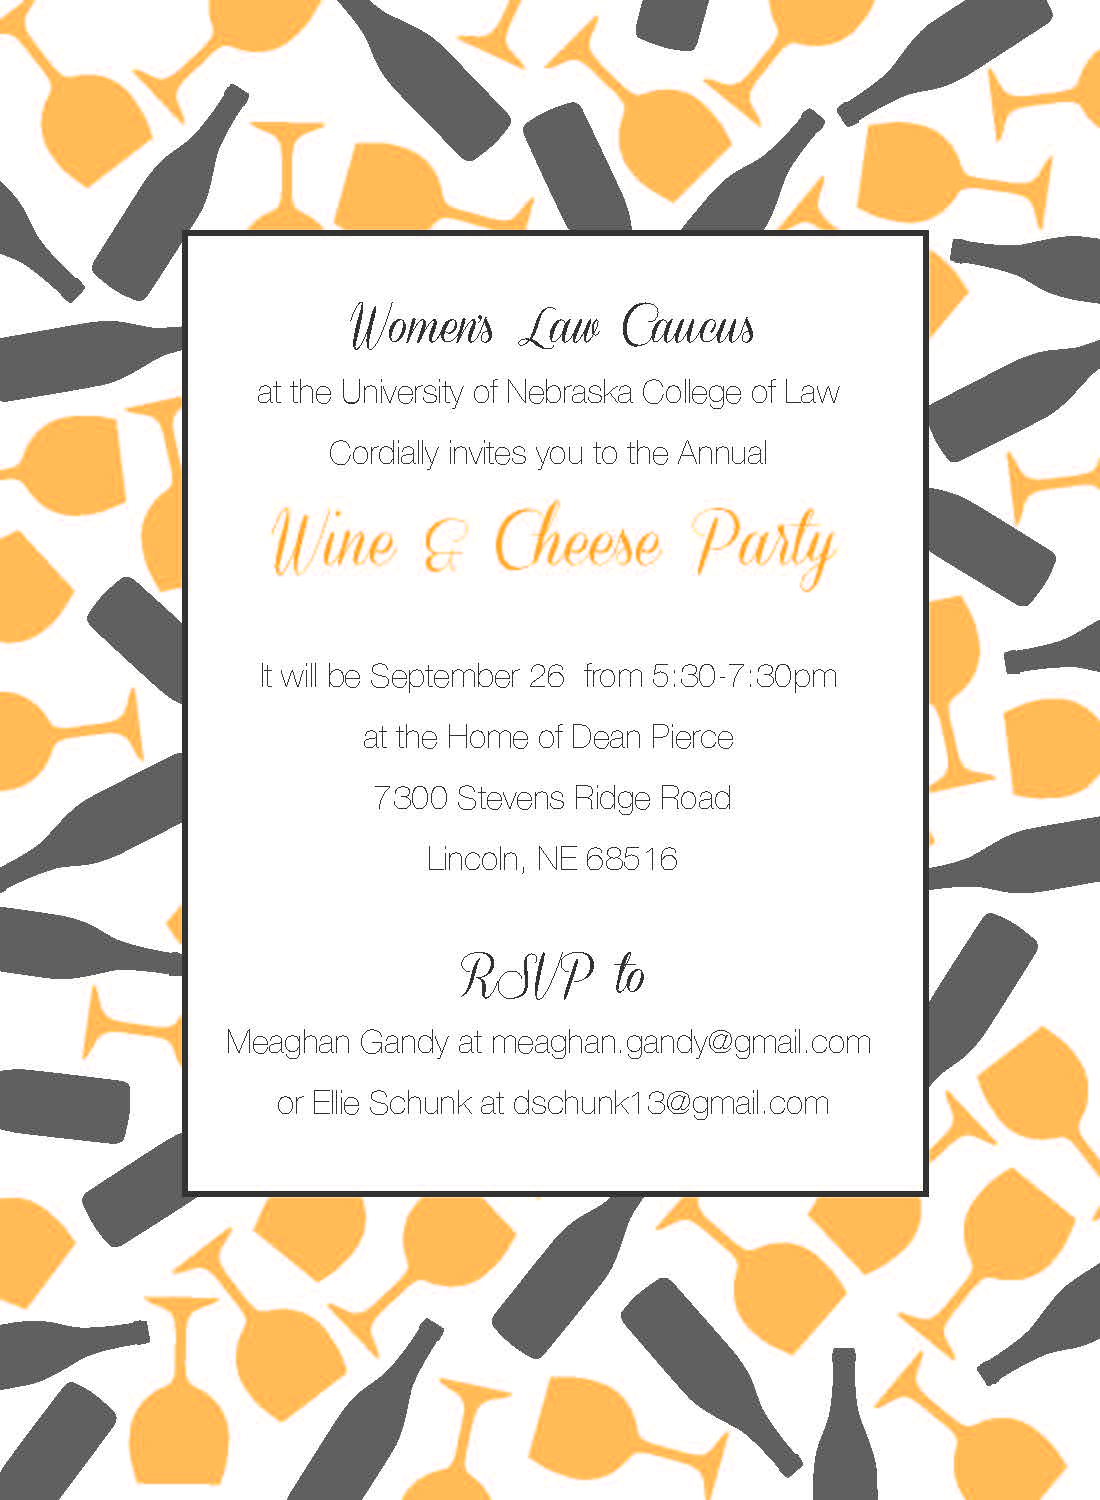 WLC Wine and Cheese Event